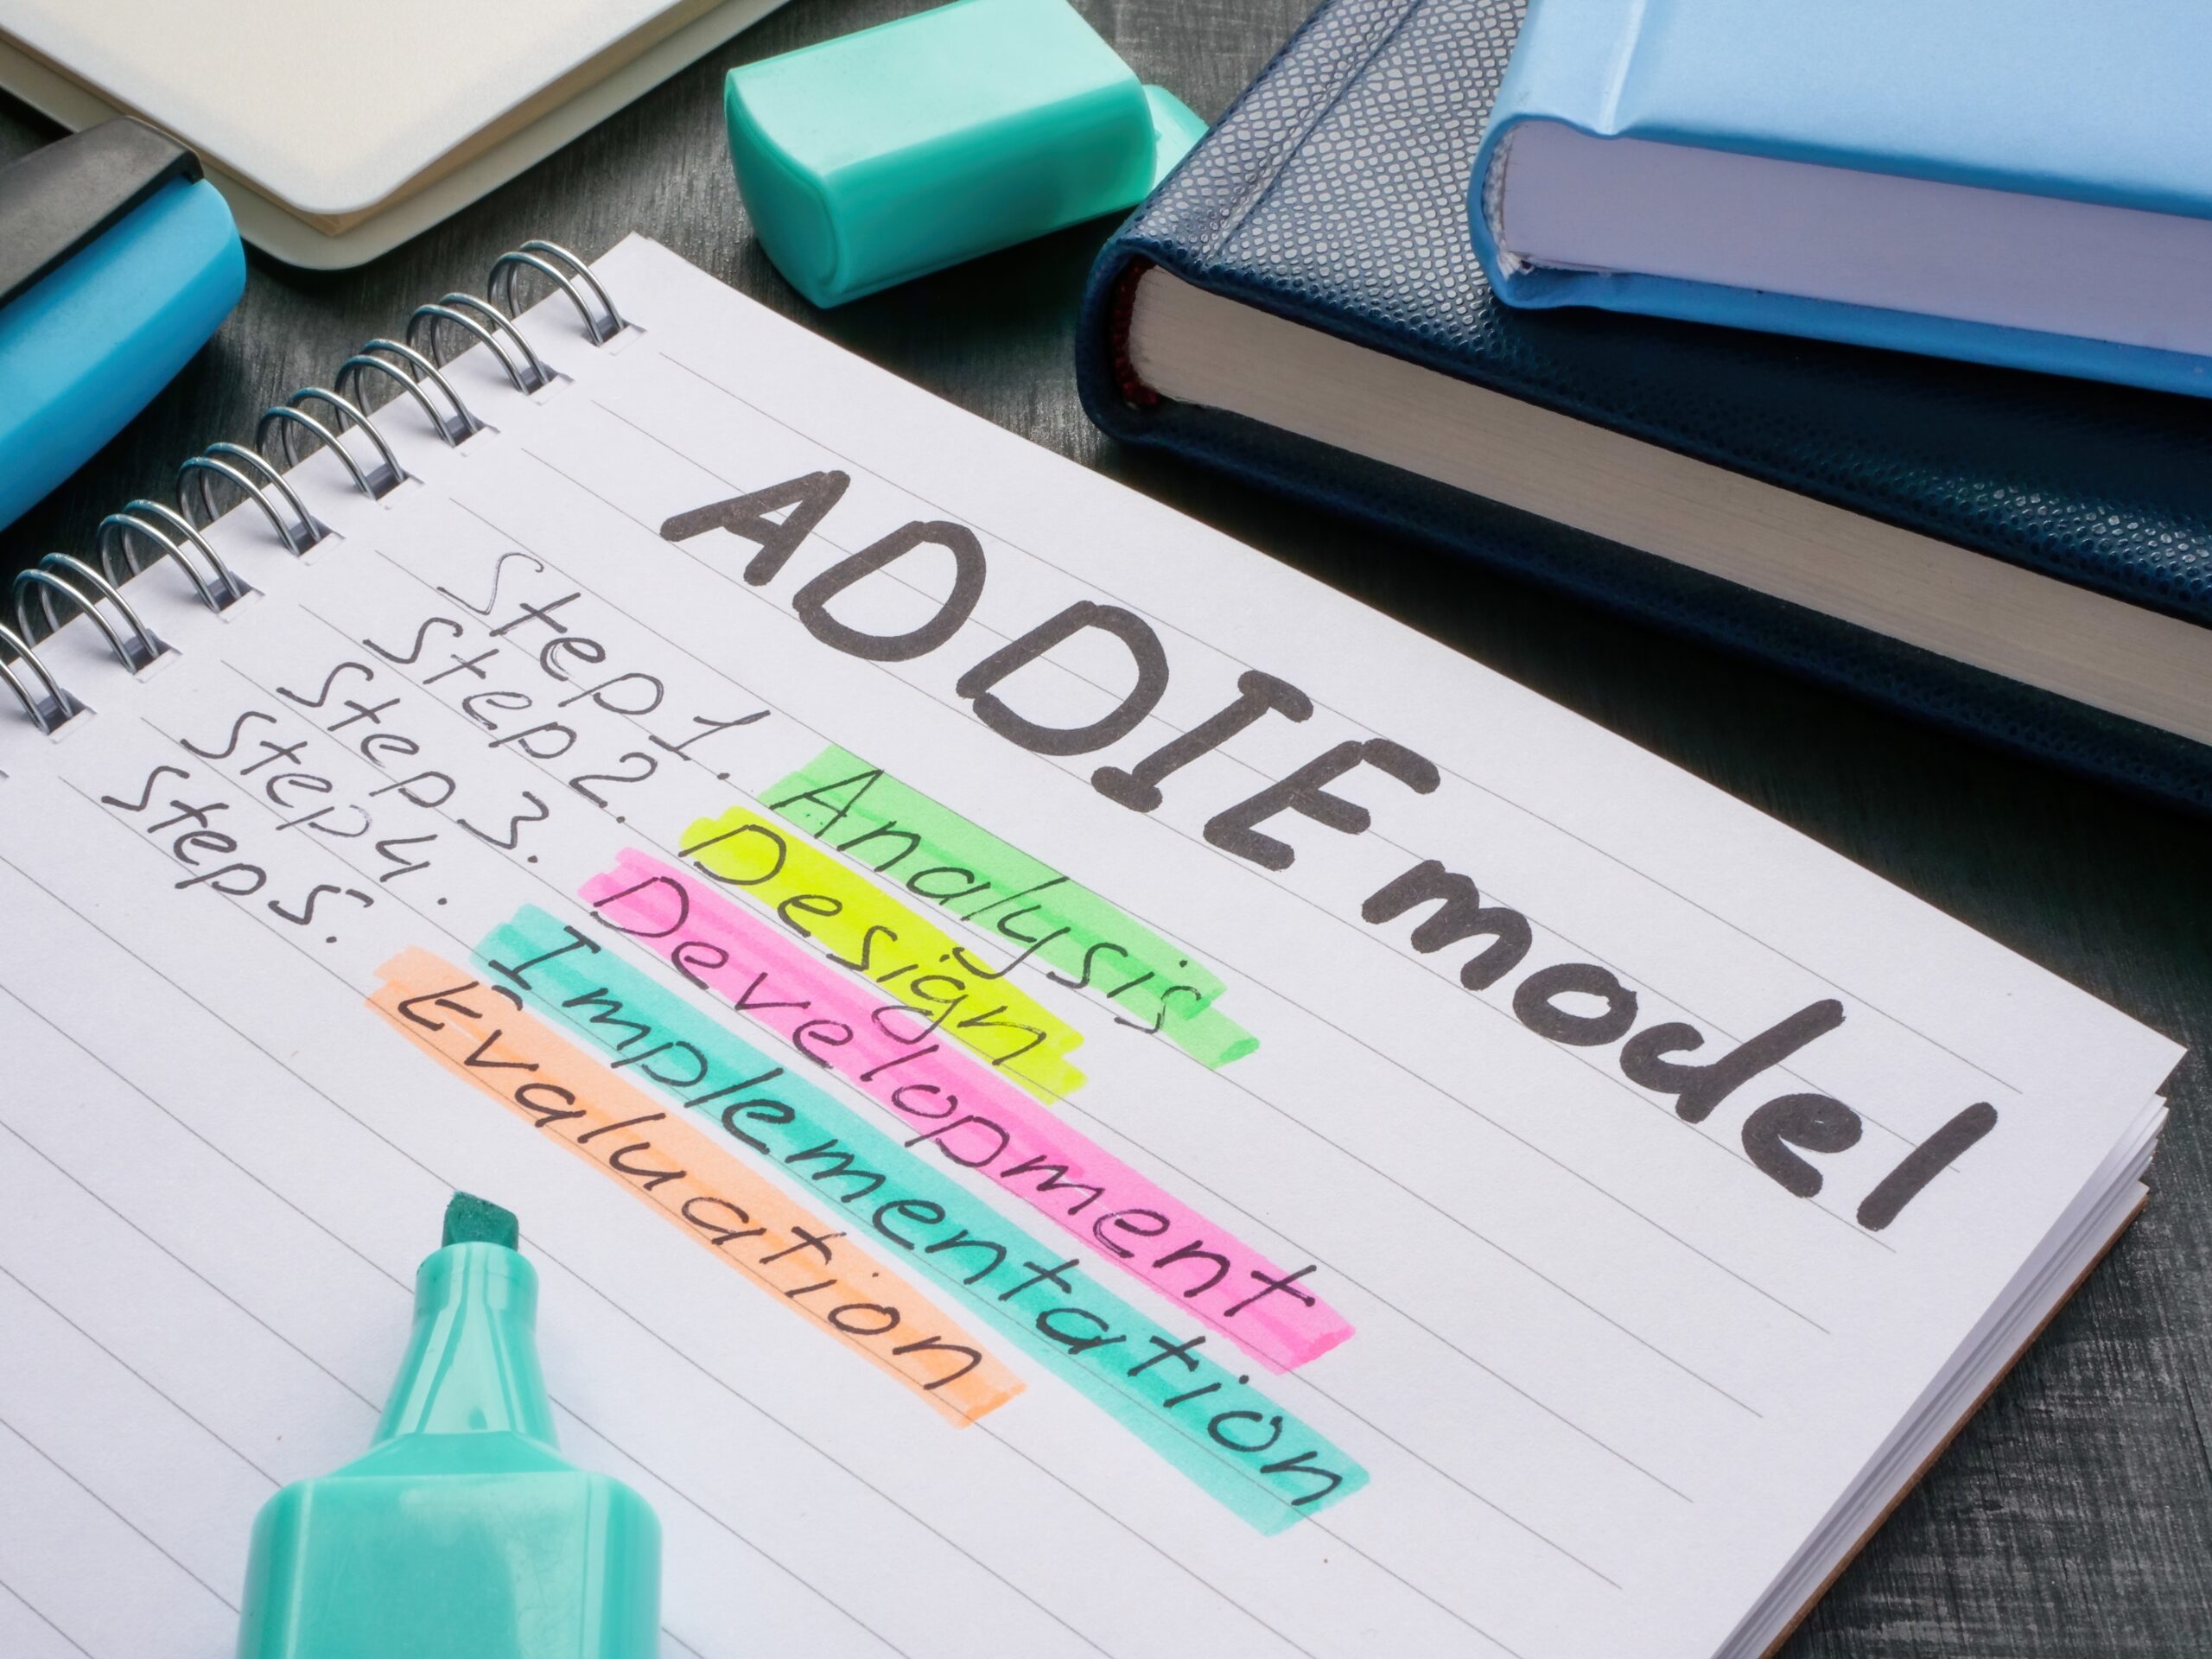 addie model highlighted on a notebook